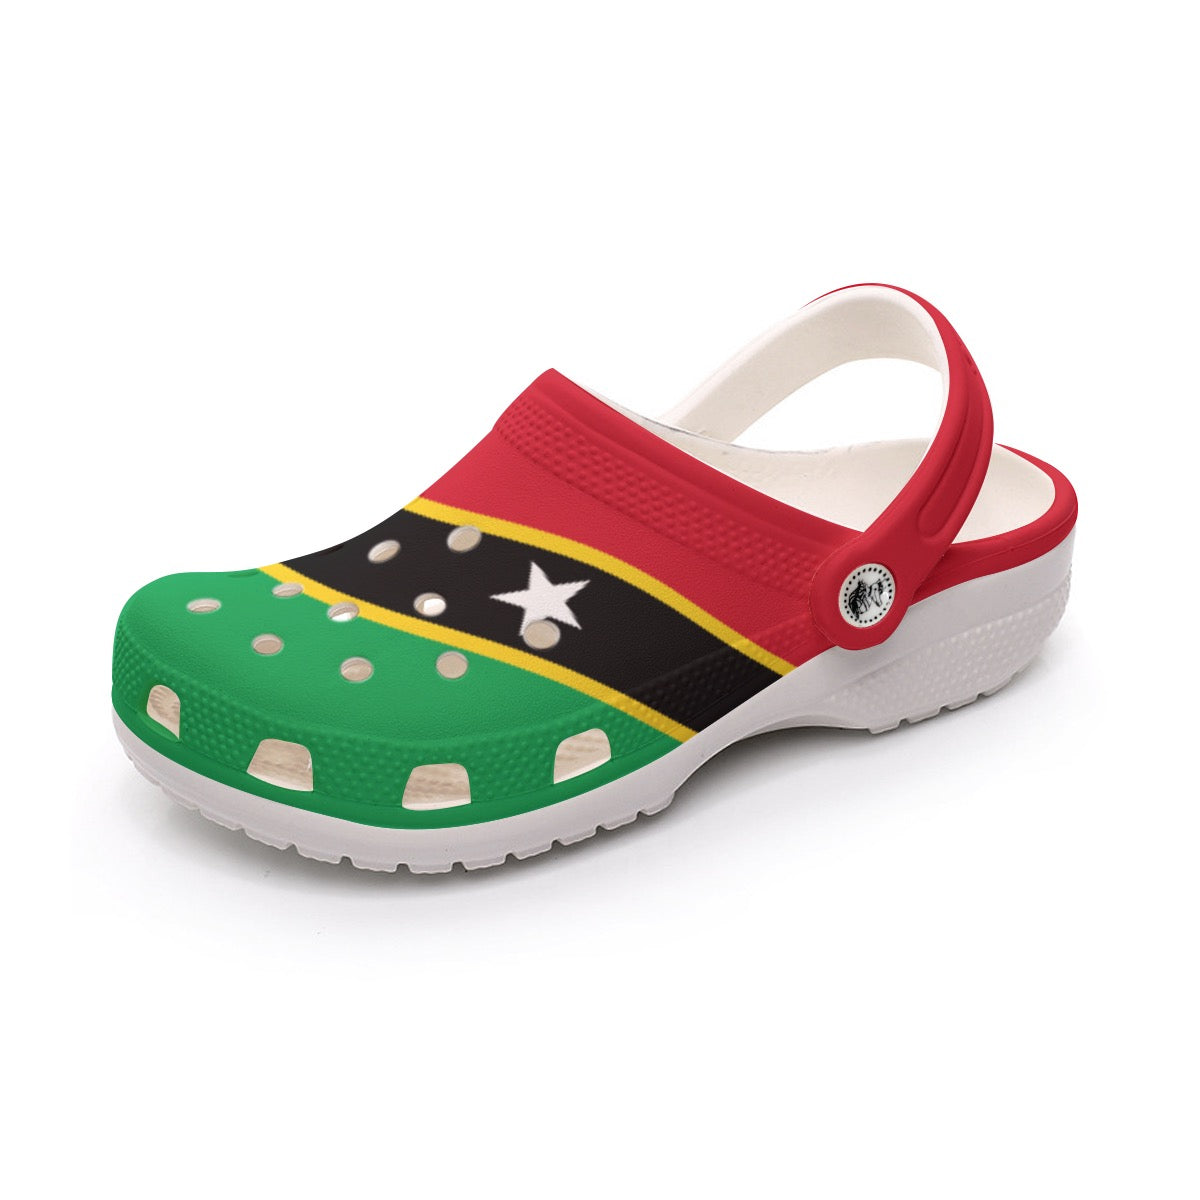 St. Kitts and Nevis Clogs - Mens